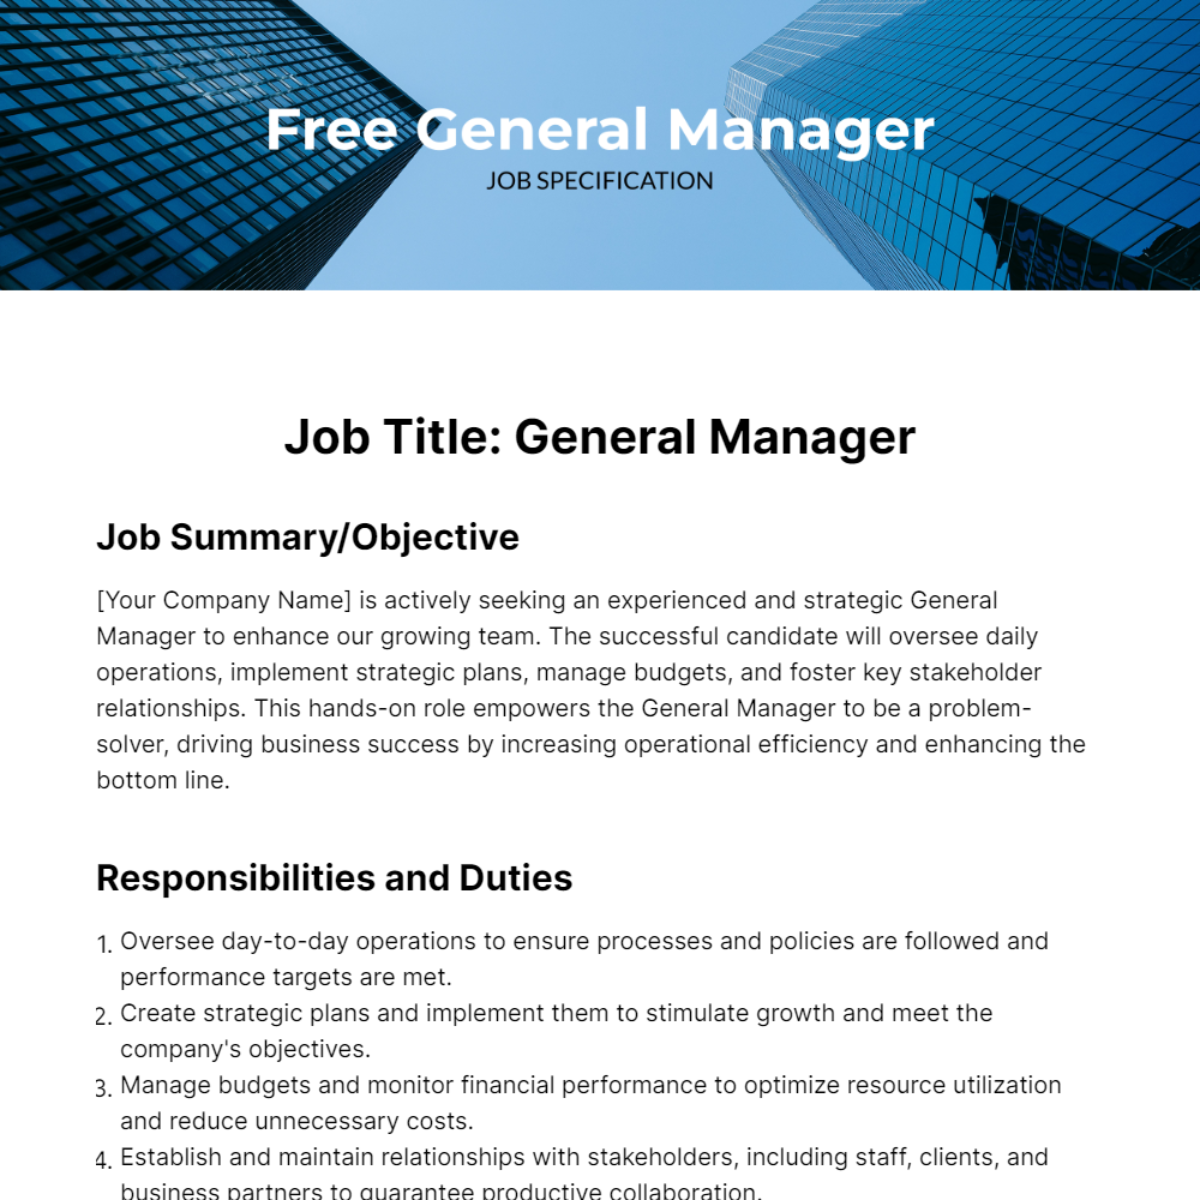 General Manager Job Specification Template